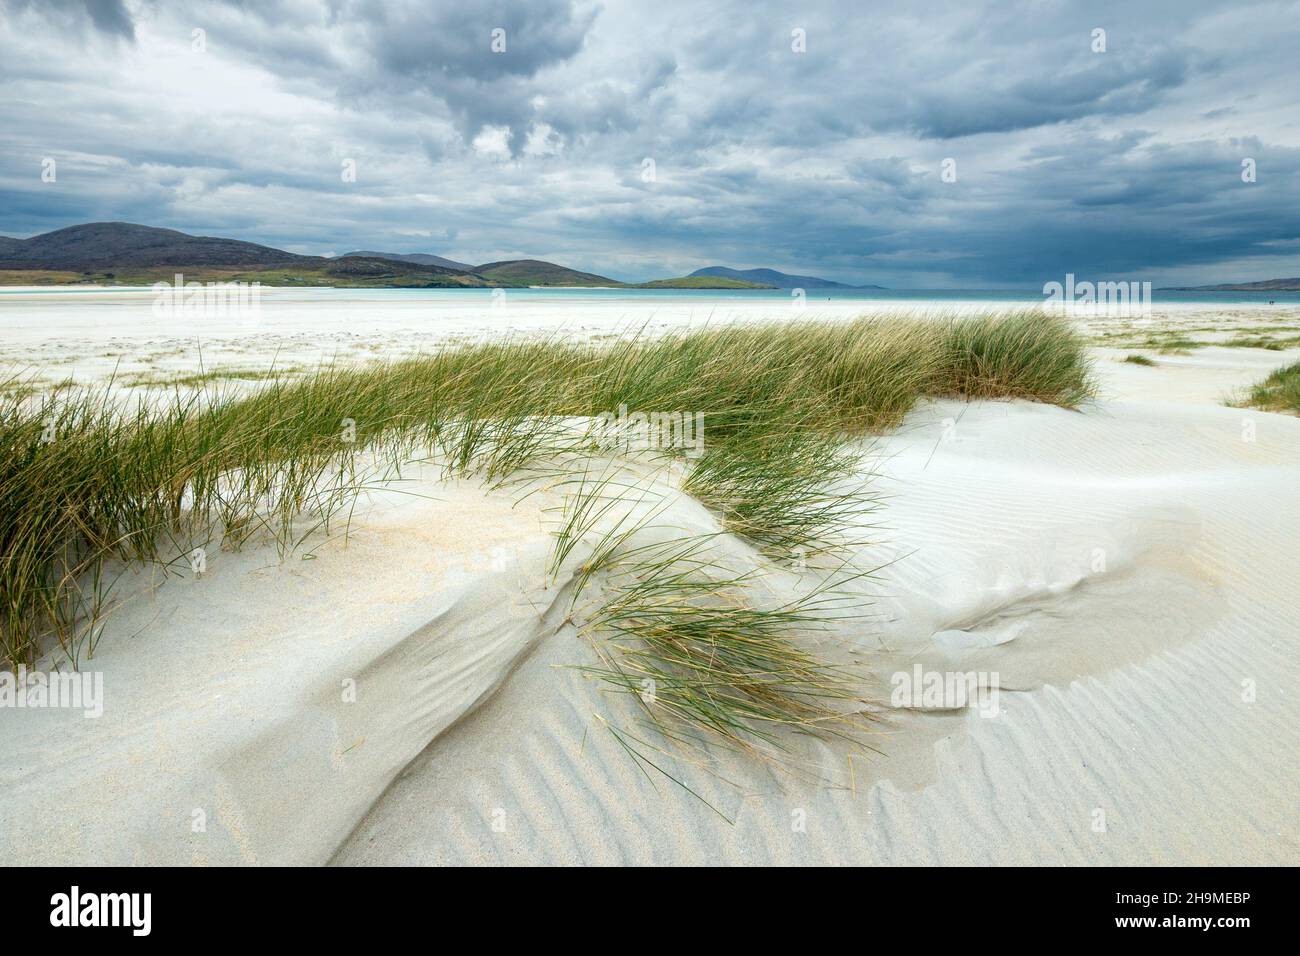 Cloudy skies over marram dune grass and Luskentyre beach on the remote Hebridean Island of Harris in the Outer Hebrides, Scotland, UK Stock Photo